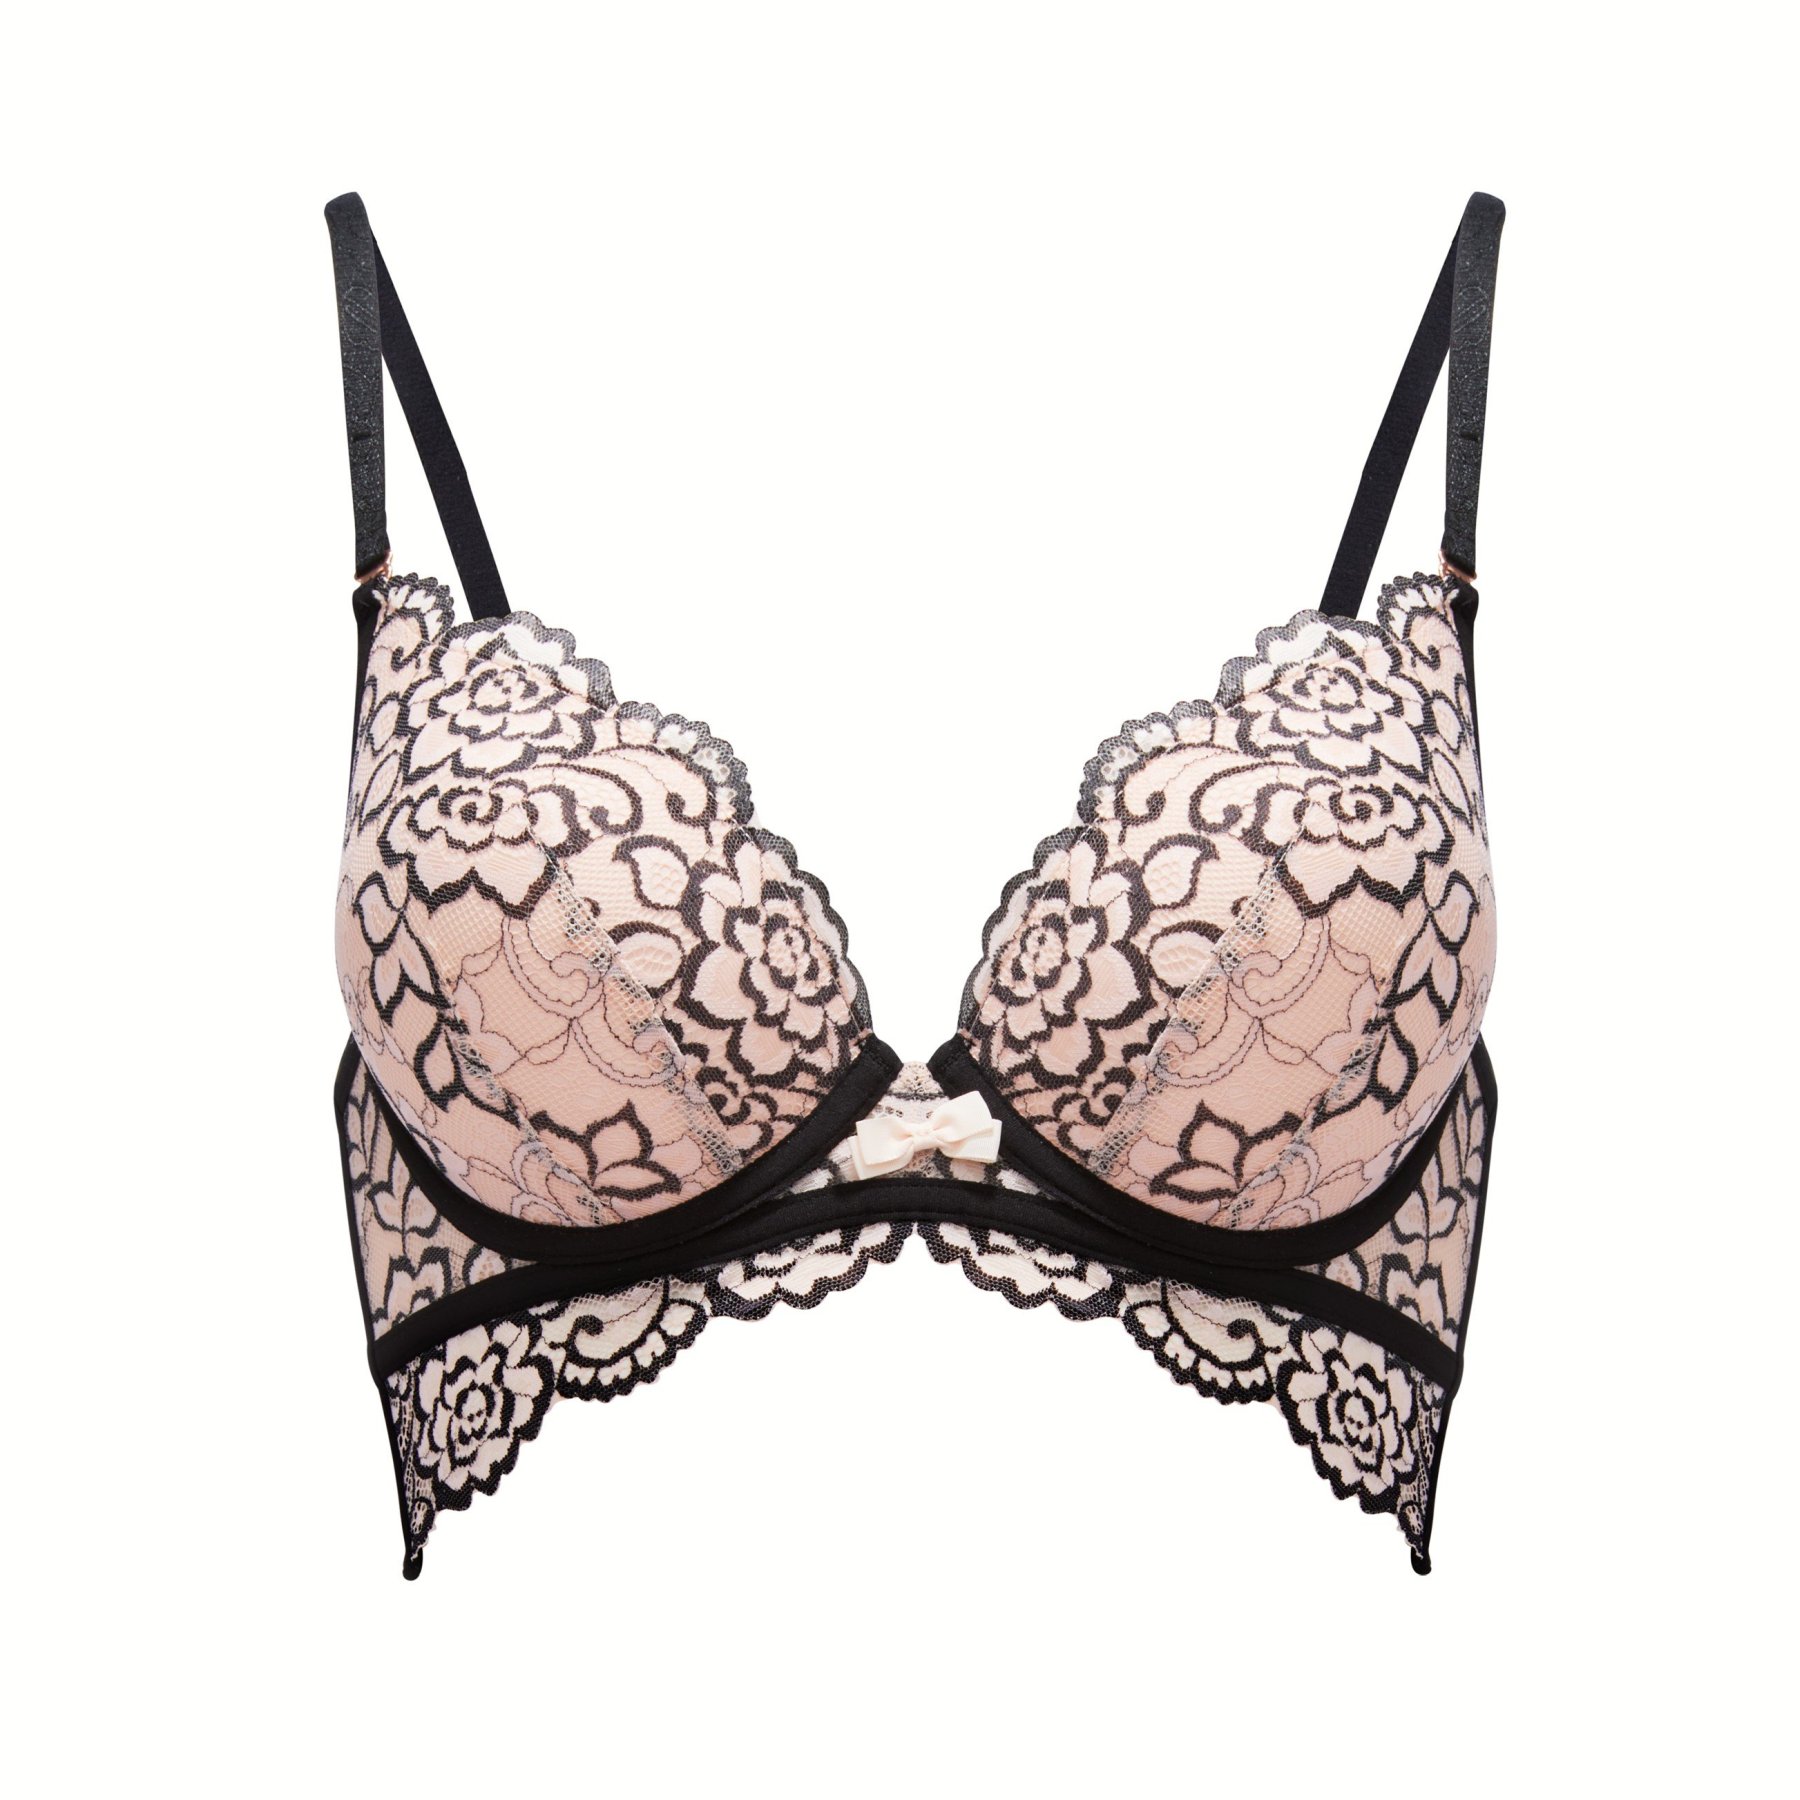 Push Up Plunge Bra with Lace My Body Pink/Black